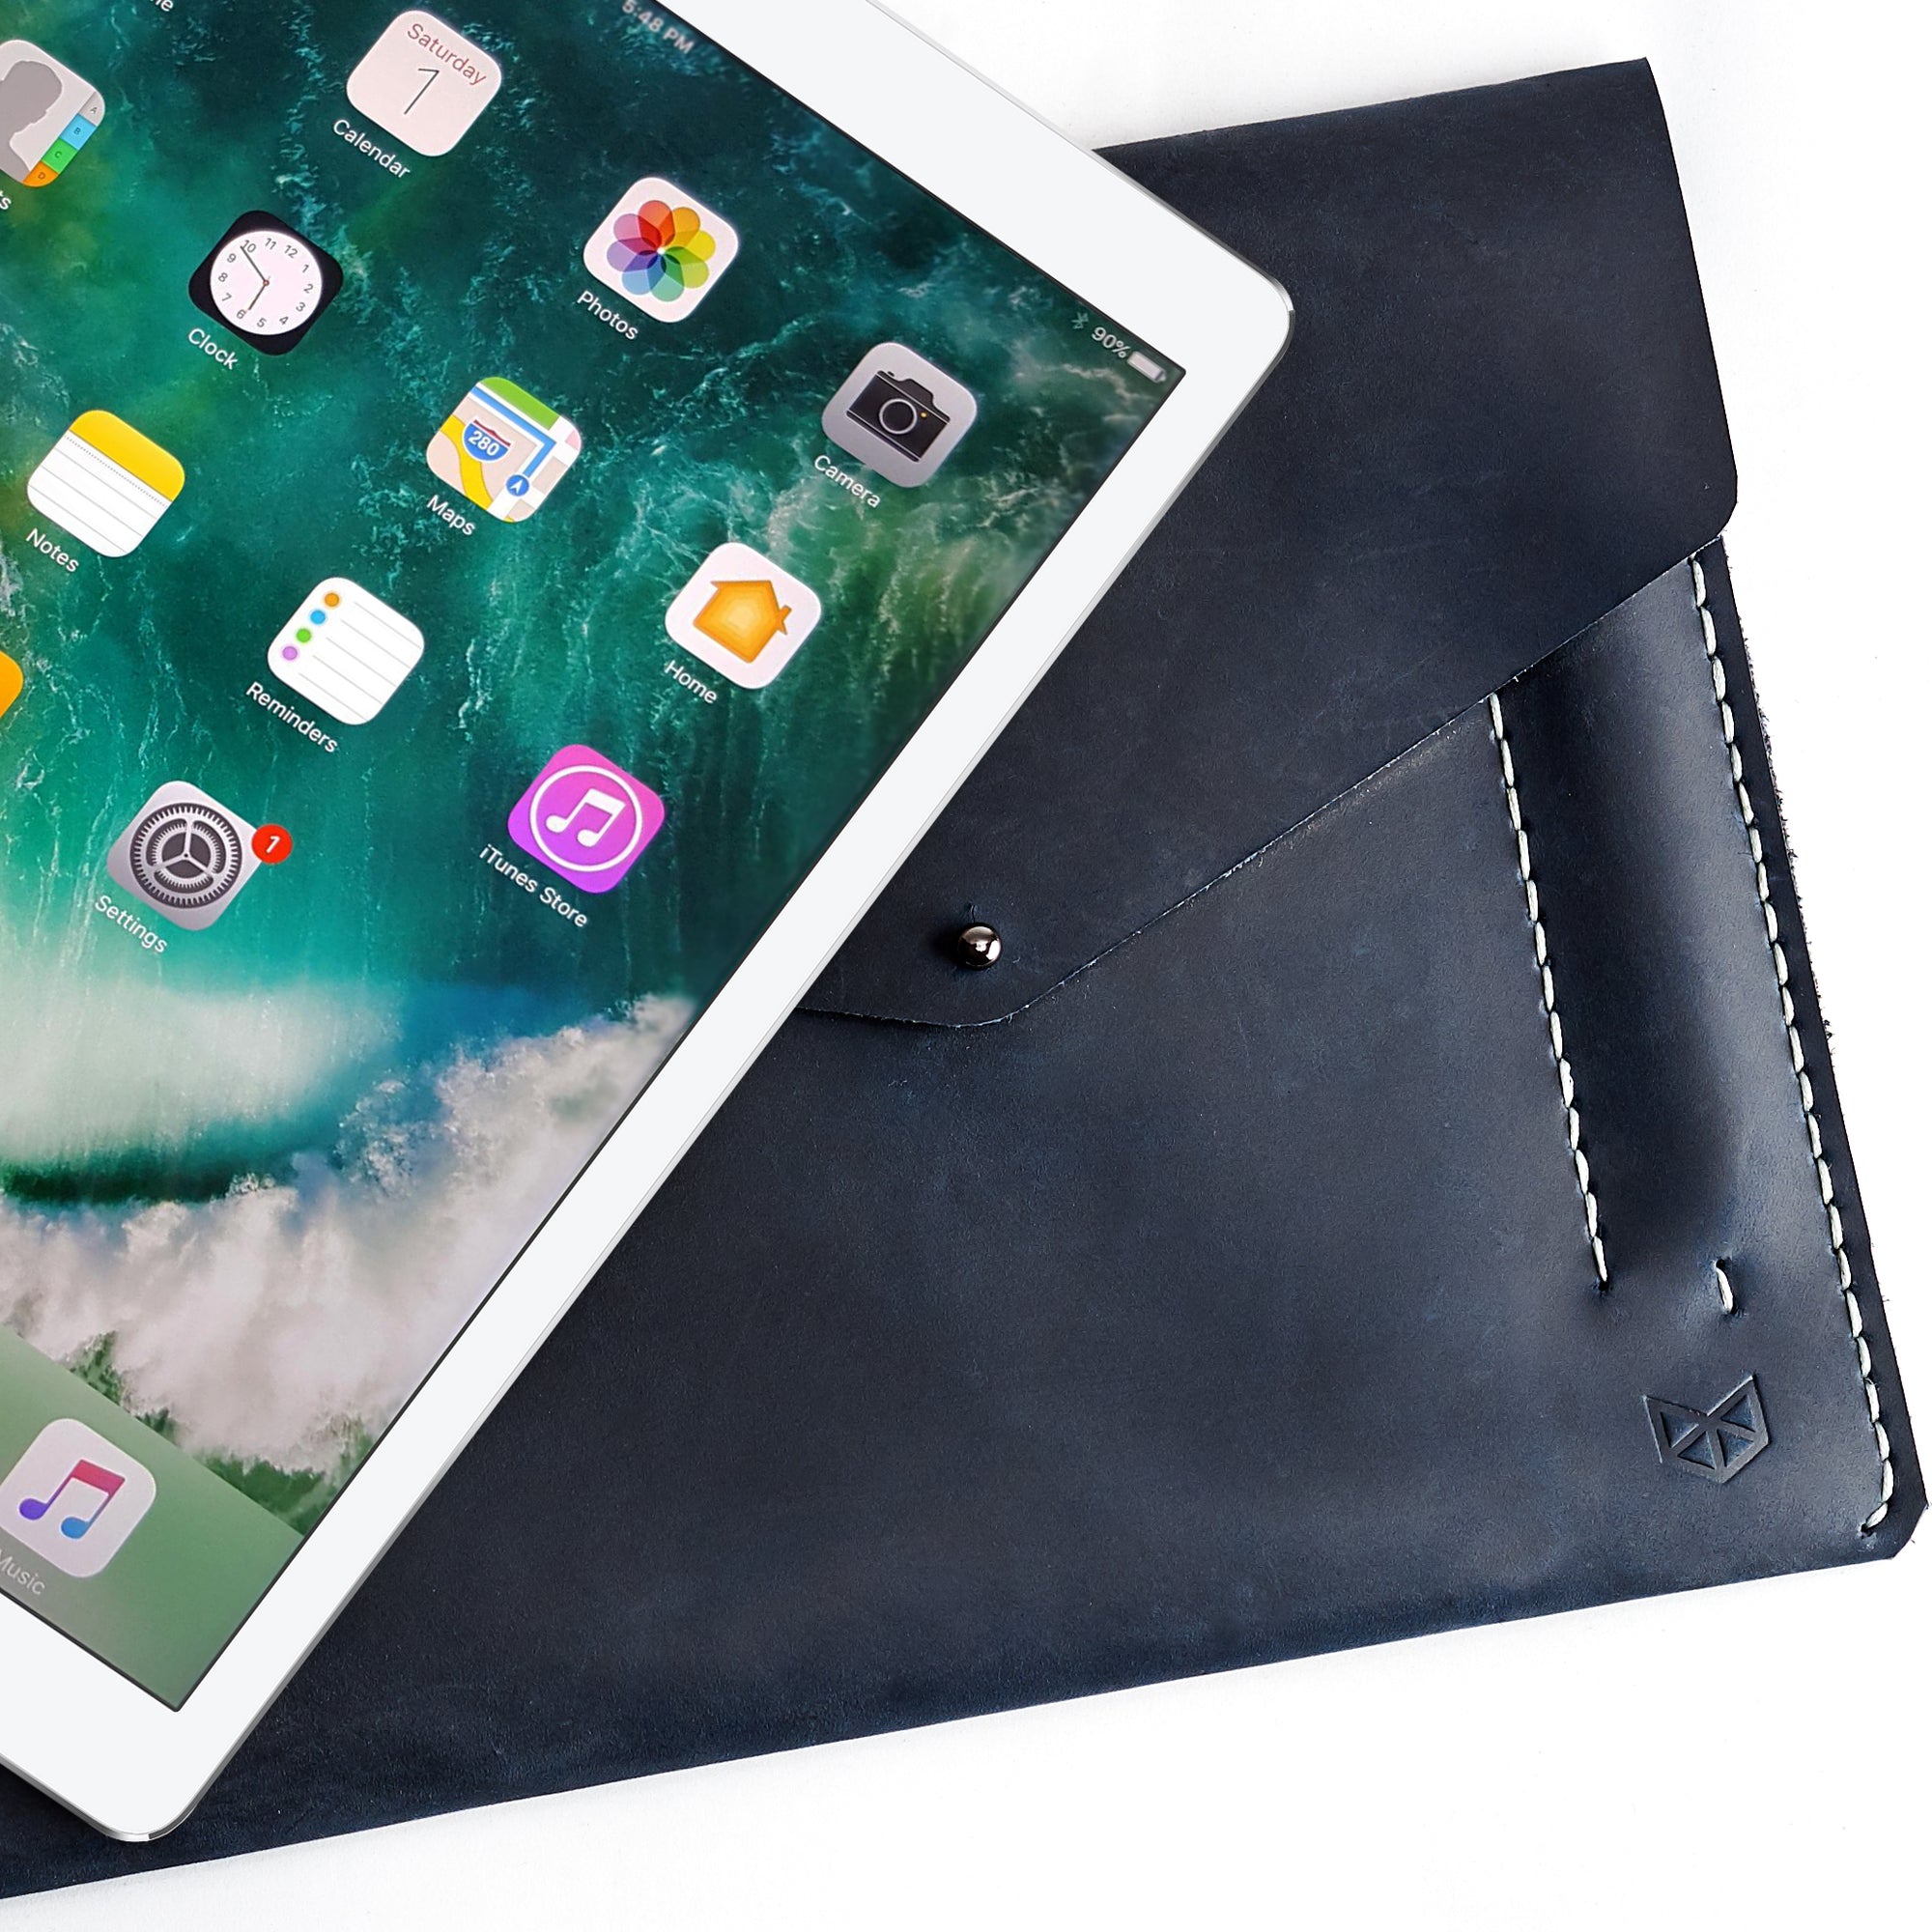 Unique mens case. Blue leather sleeve for iPad pro 10.5 inch 12.9 inch. Mens gifts